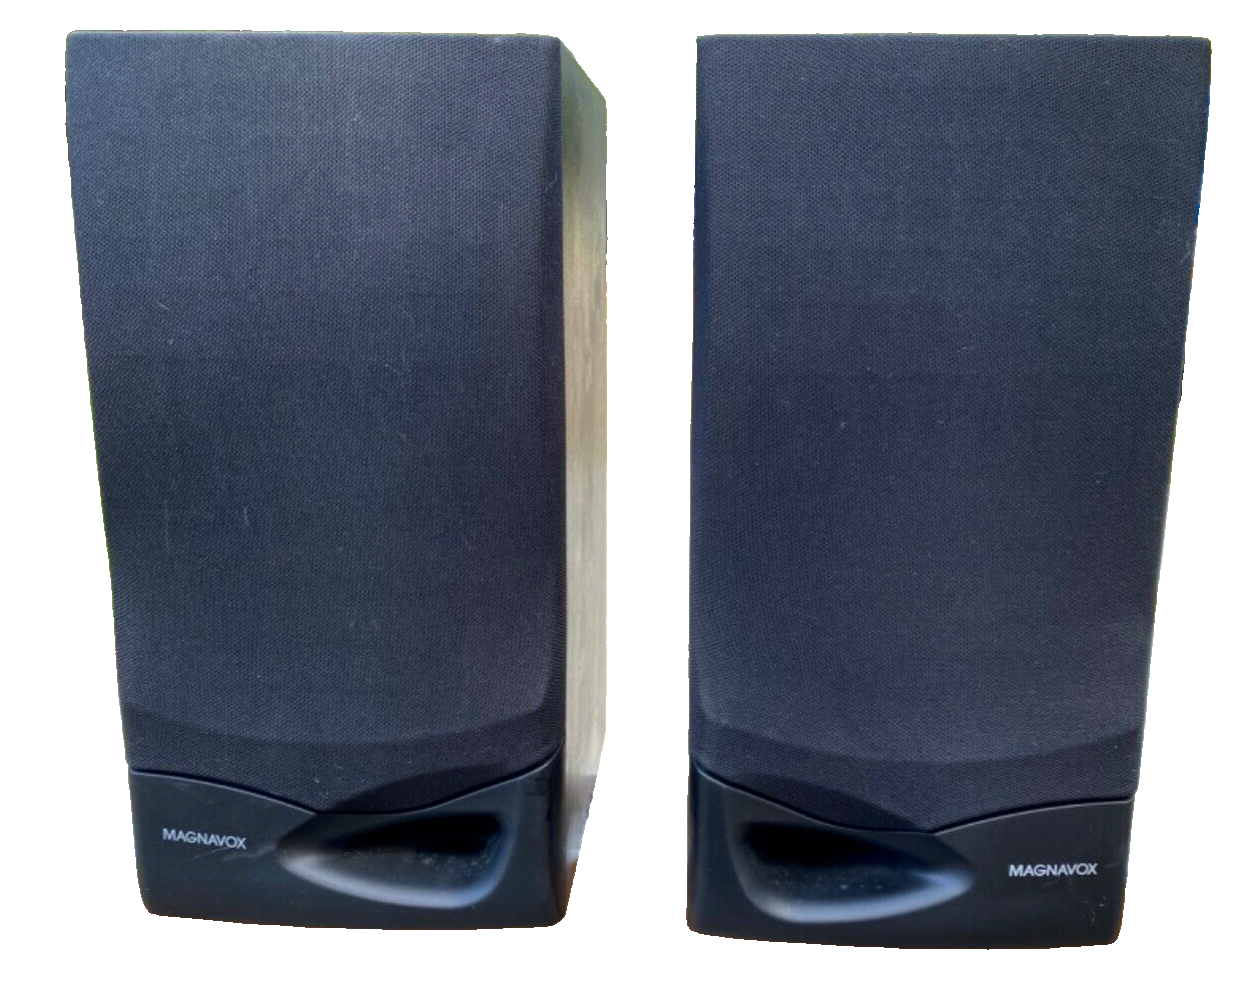 2 Speaker System Phillips Magnavox Wired  FB 36/37 6 Ohm's  -Tested-Loud bass - $36.44